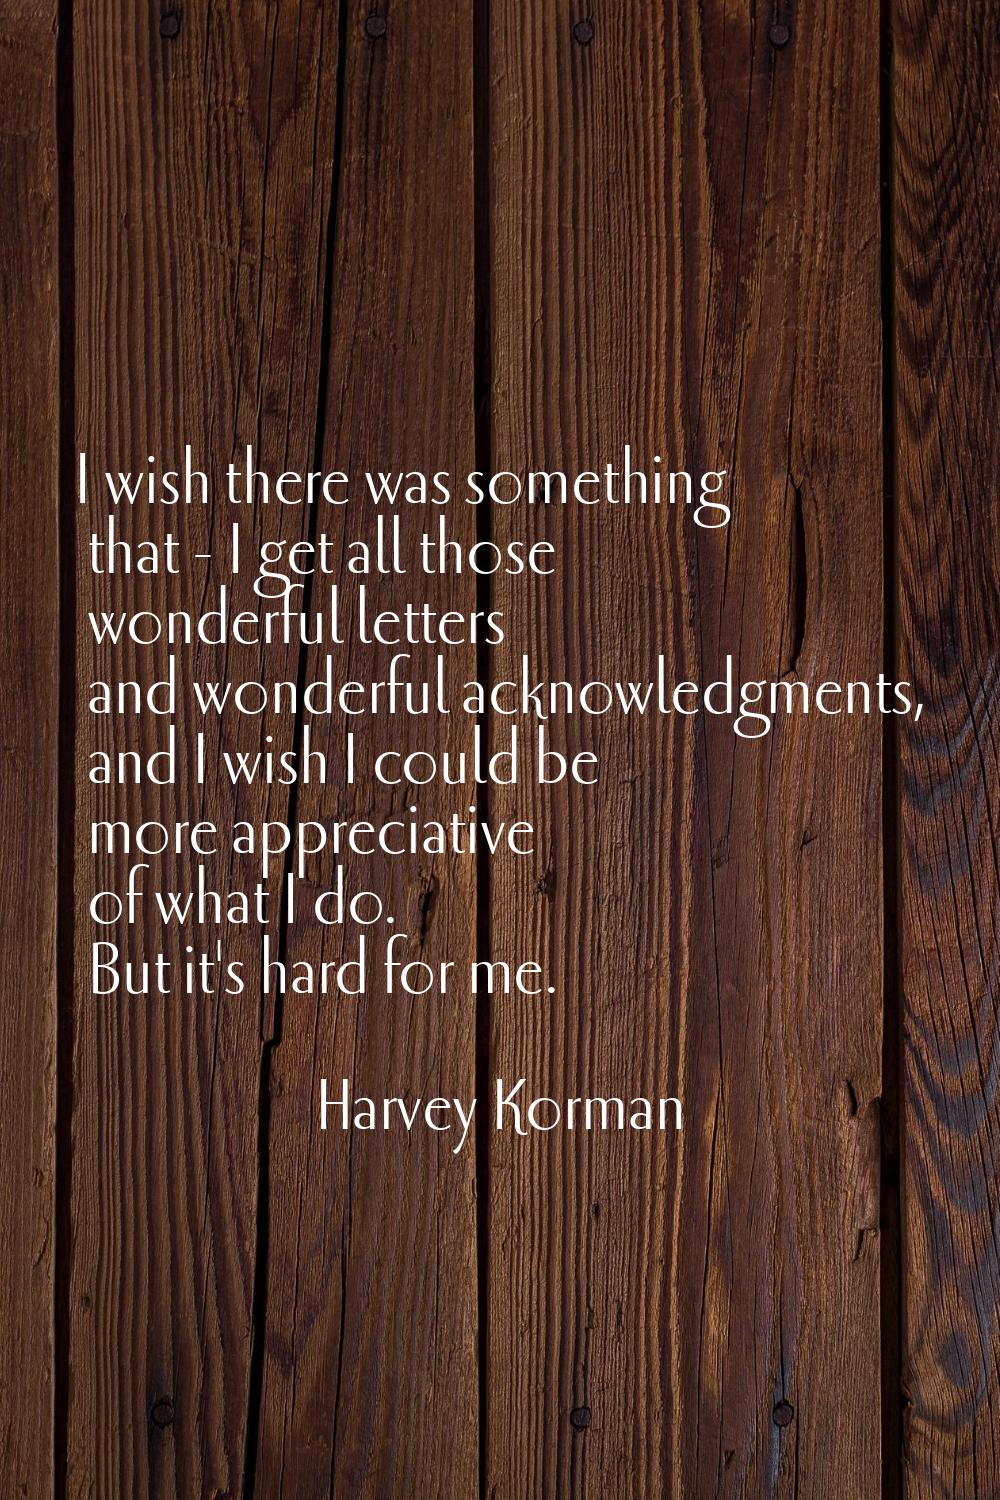 I wish there was something that - I get all those wonderful letters and wonderful acknowledgments, 